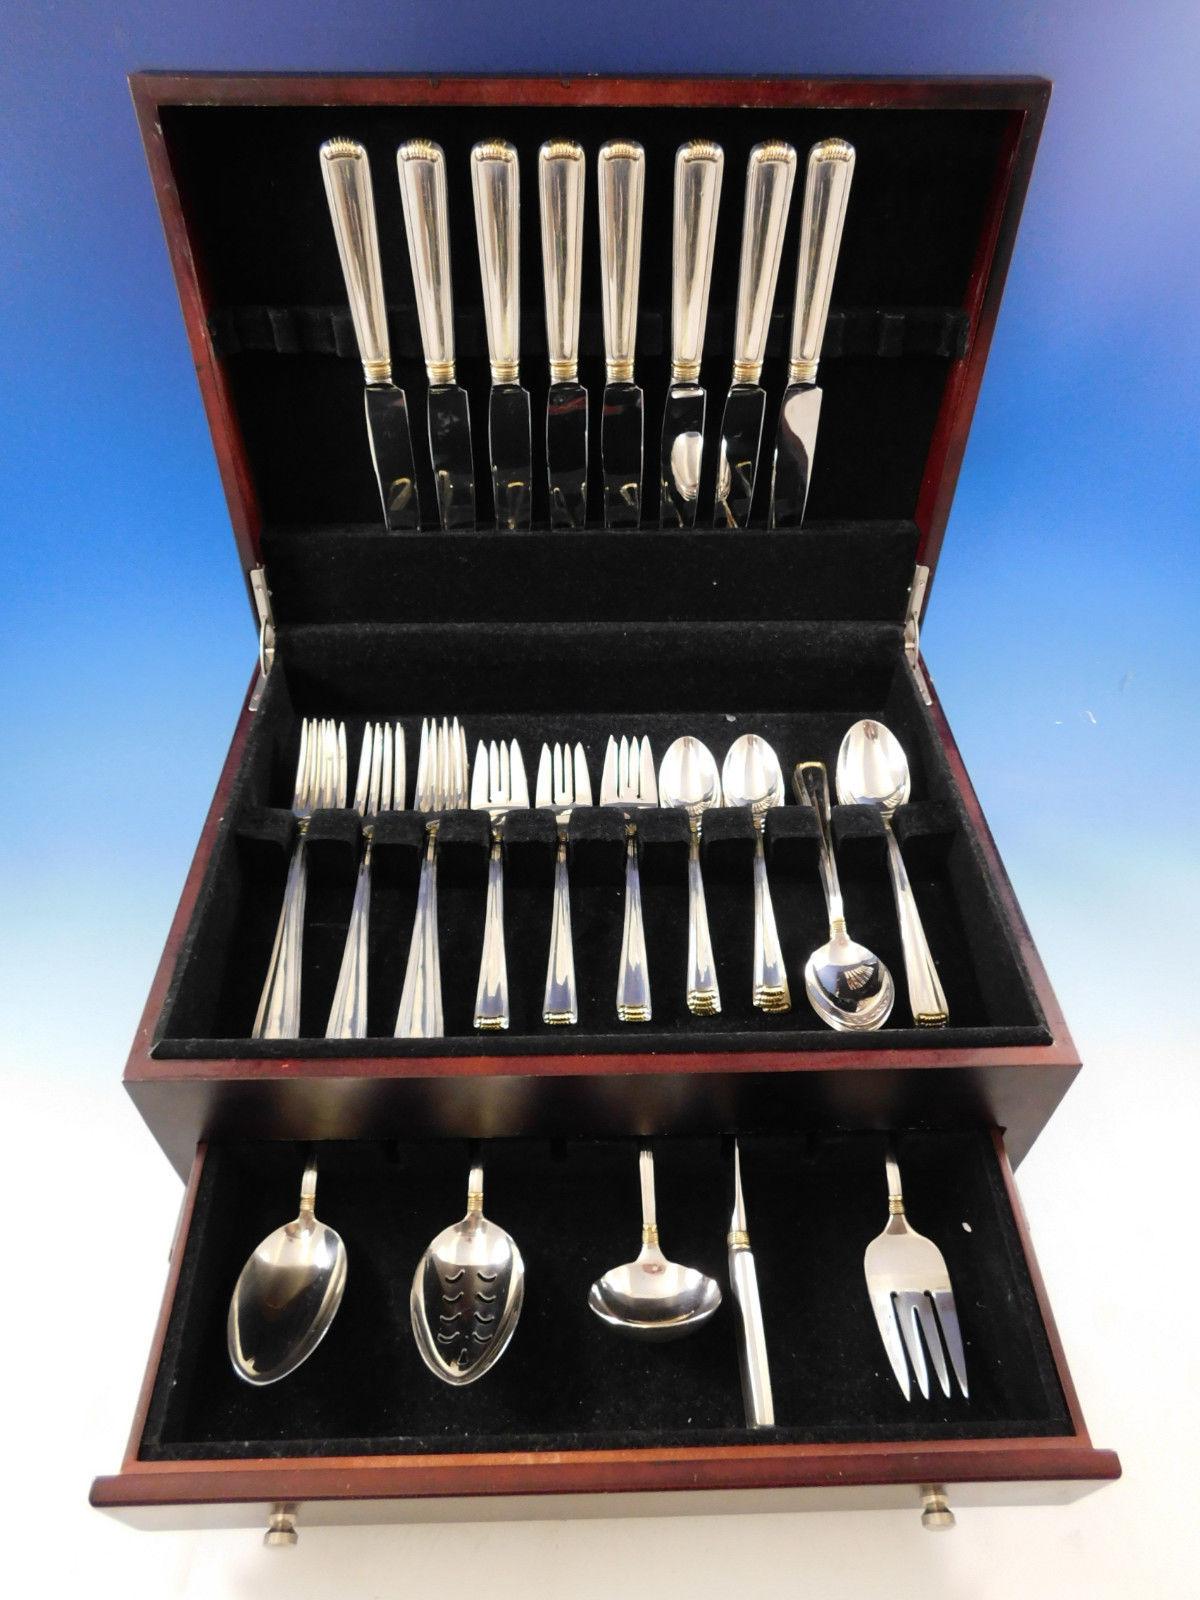 Dinner size Marie Louise with gold accent by Blackinton sterling silver flatware set, 45 pieces. This set includes:

8 dinner size knives, 9 3/4